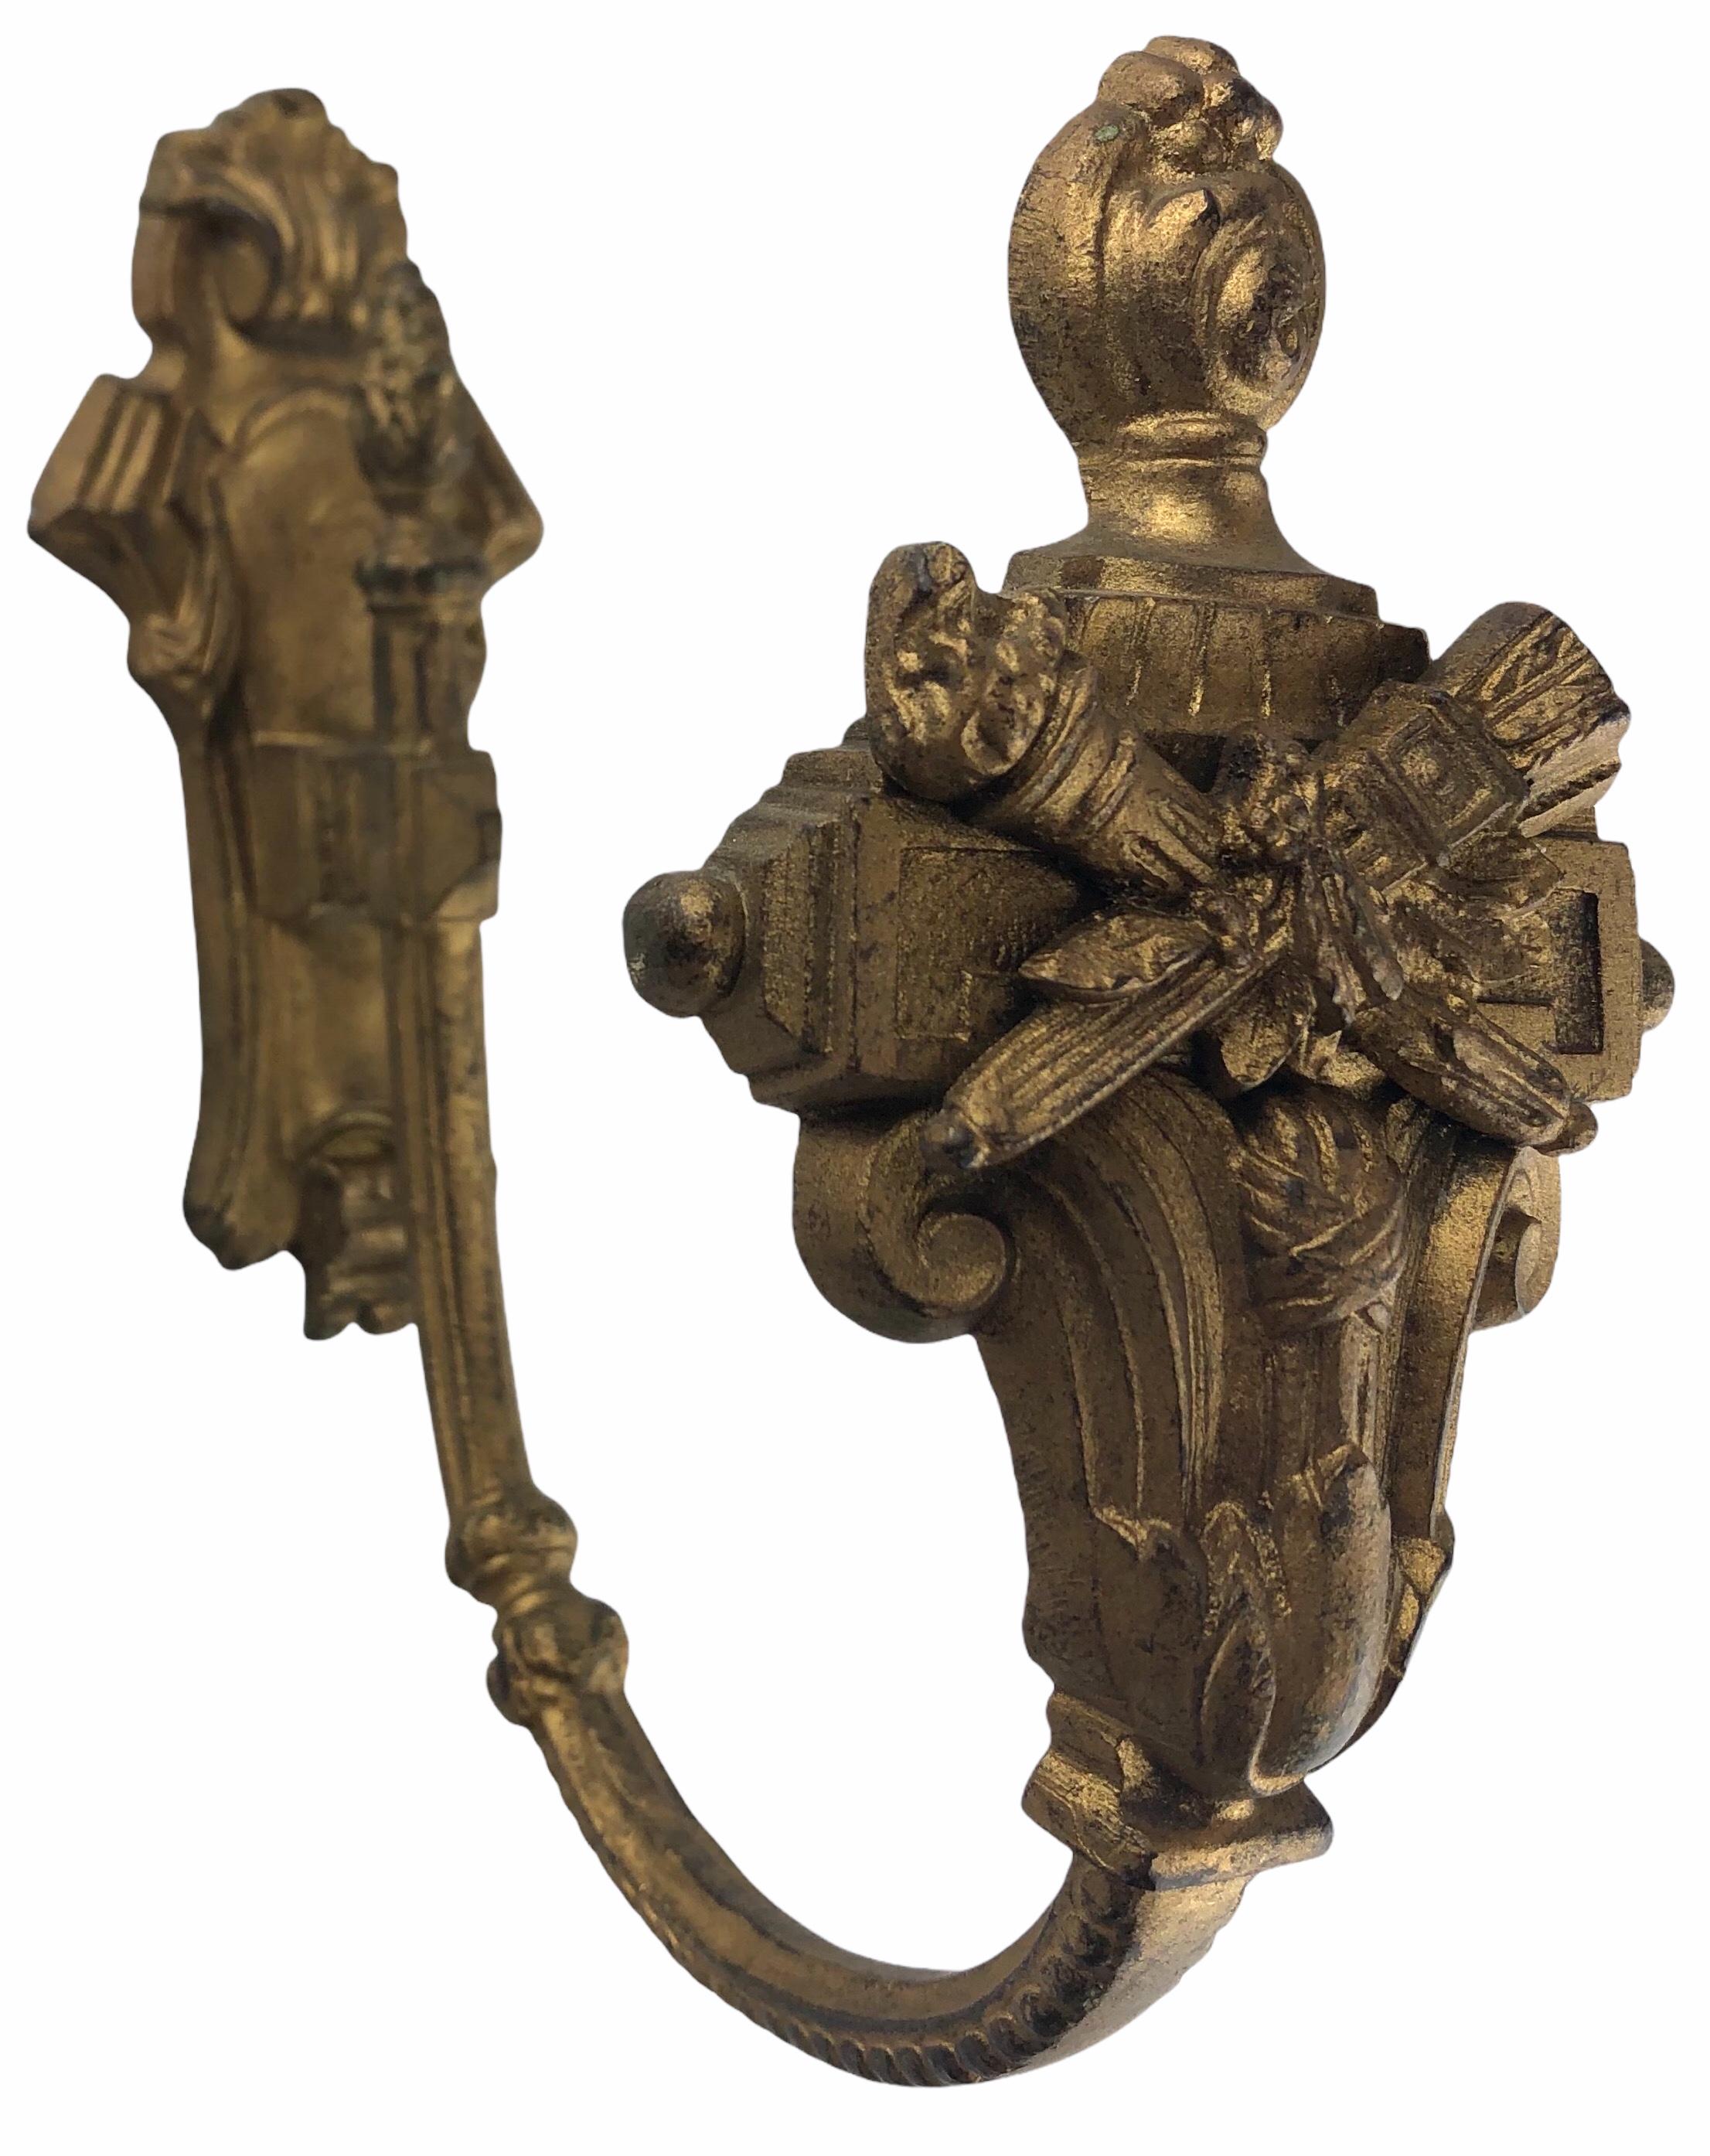 Pair of sculpted gilt bronze curtain hooks or tie-backs richly decorated with foliage, garlands, Rocaille and ovals, Louis XVI style.

These beautiful items are of very high quality.
Measures: 6